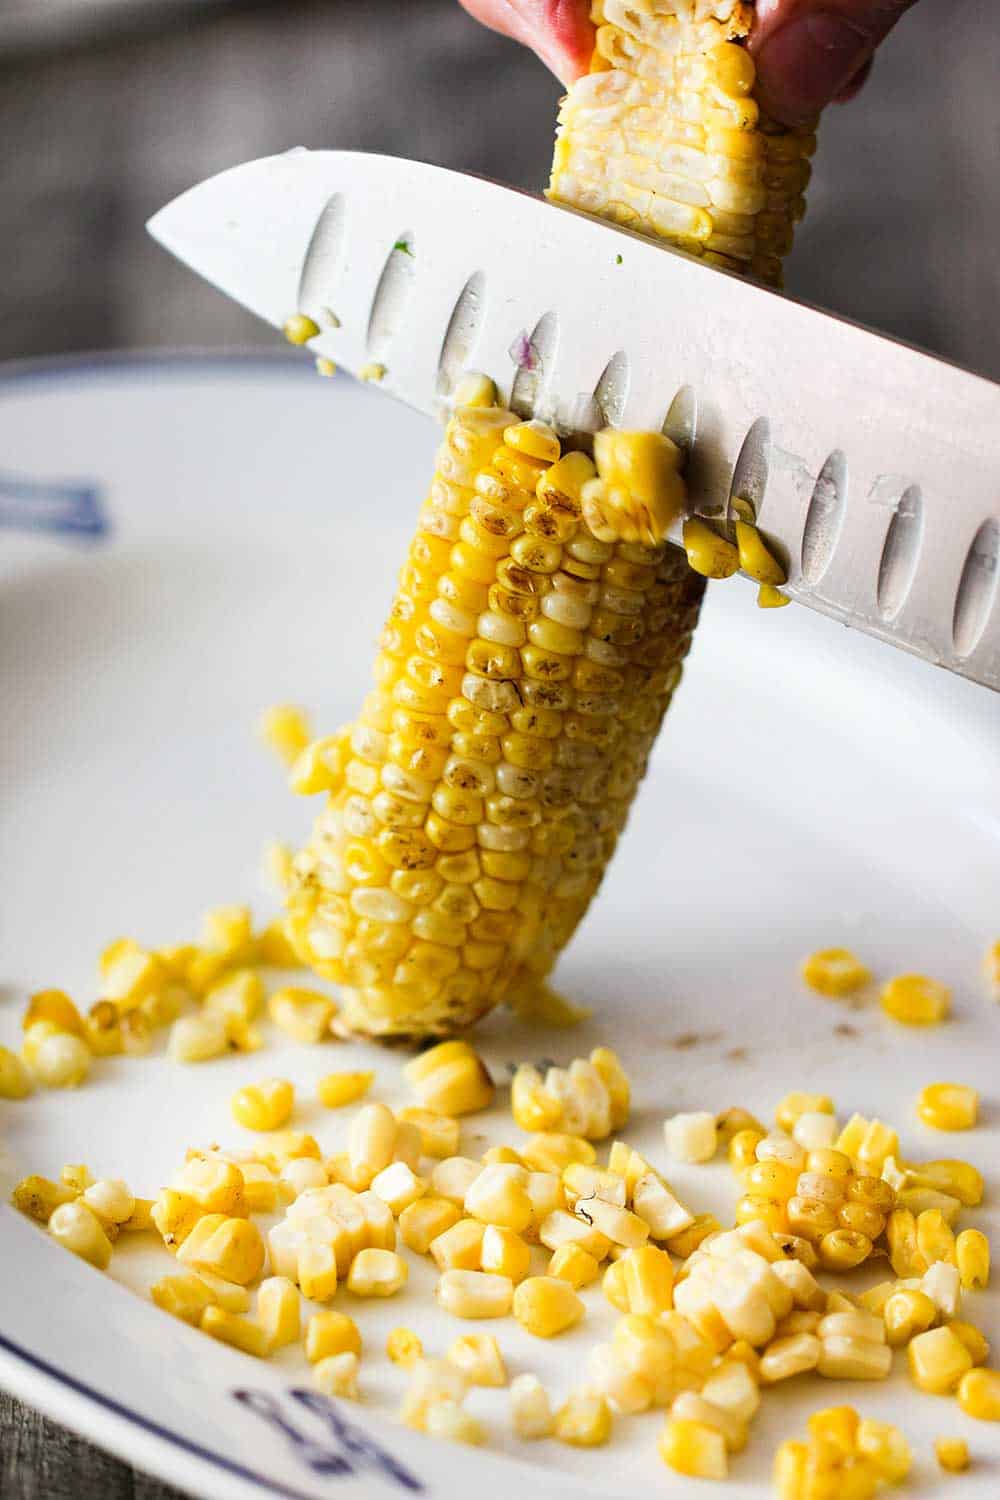 Use a sharp knife to remove the kernels from the cob for the grilled shrimp salad. 